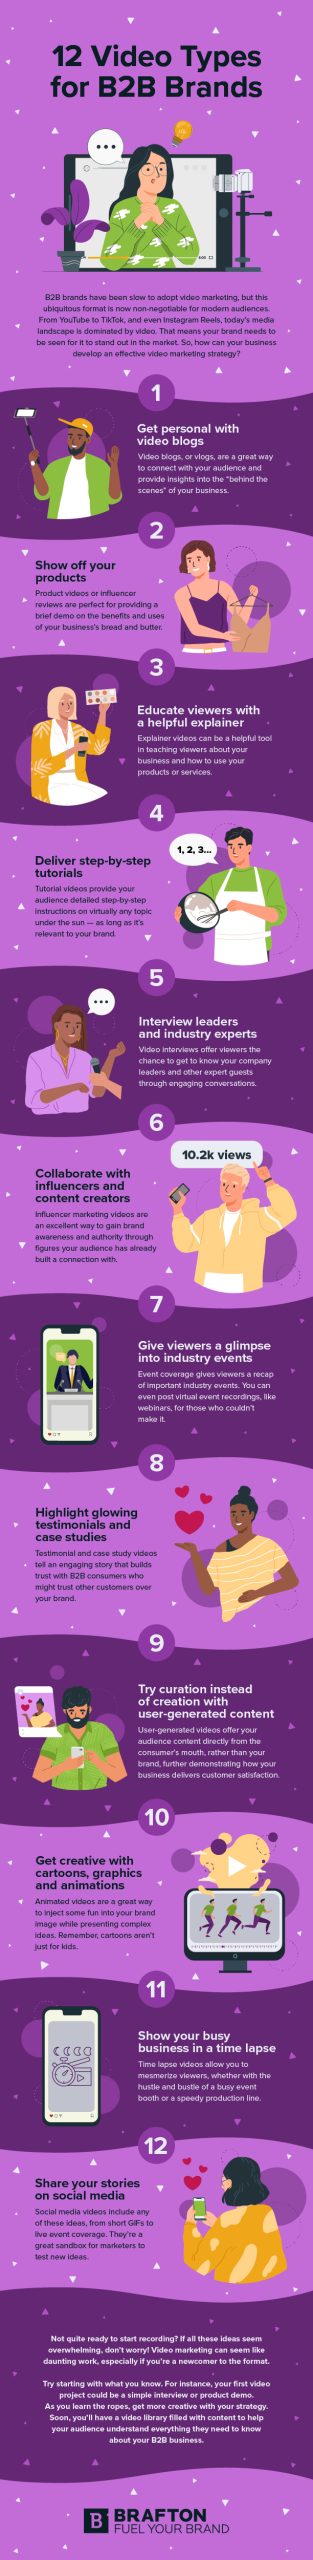 12 video types for B2B brands infographic